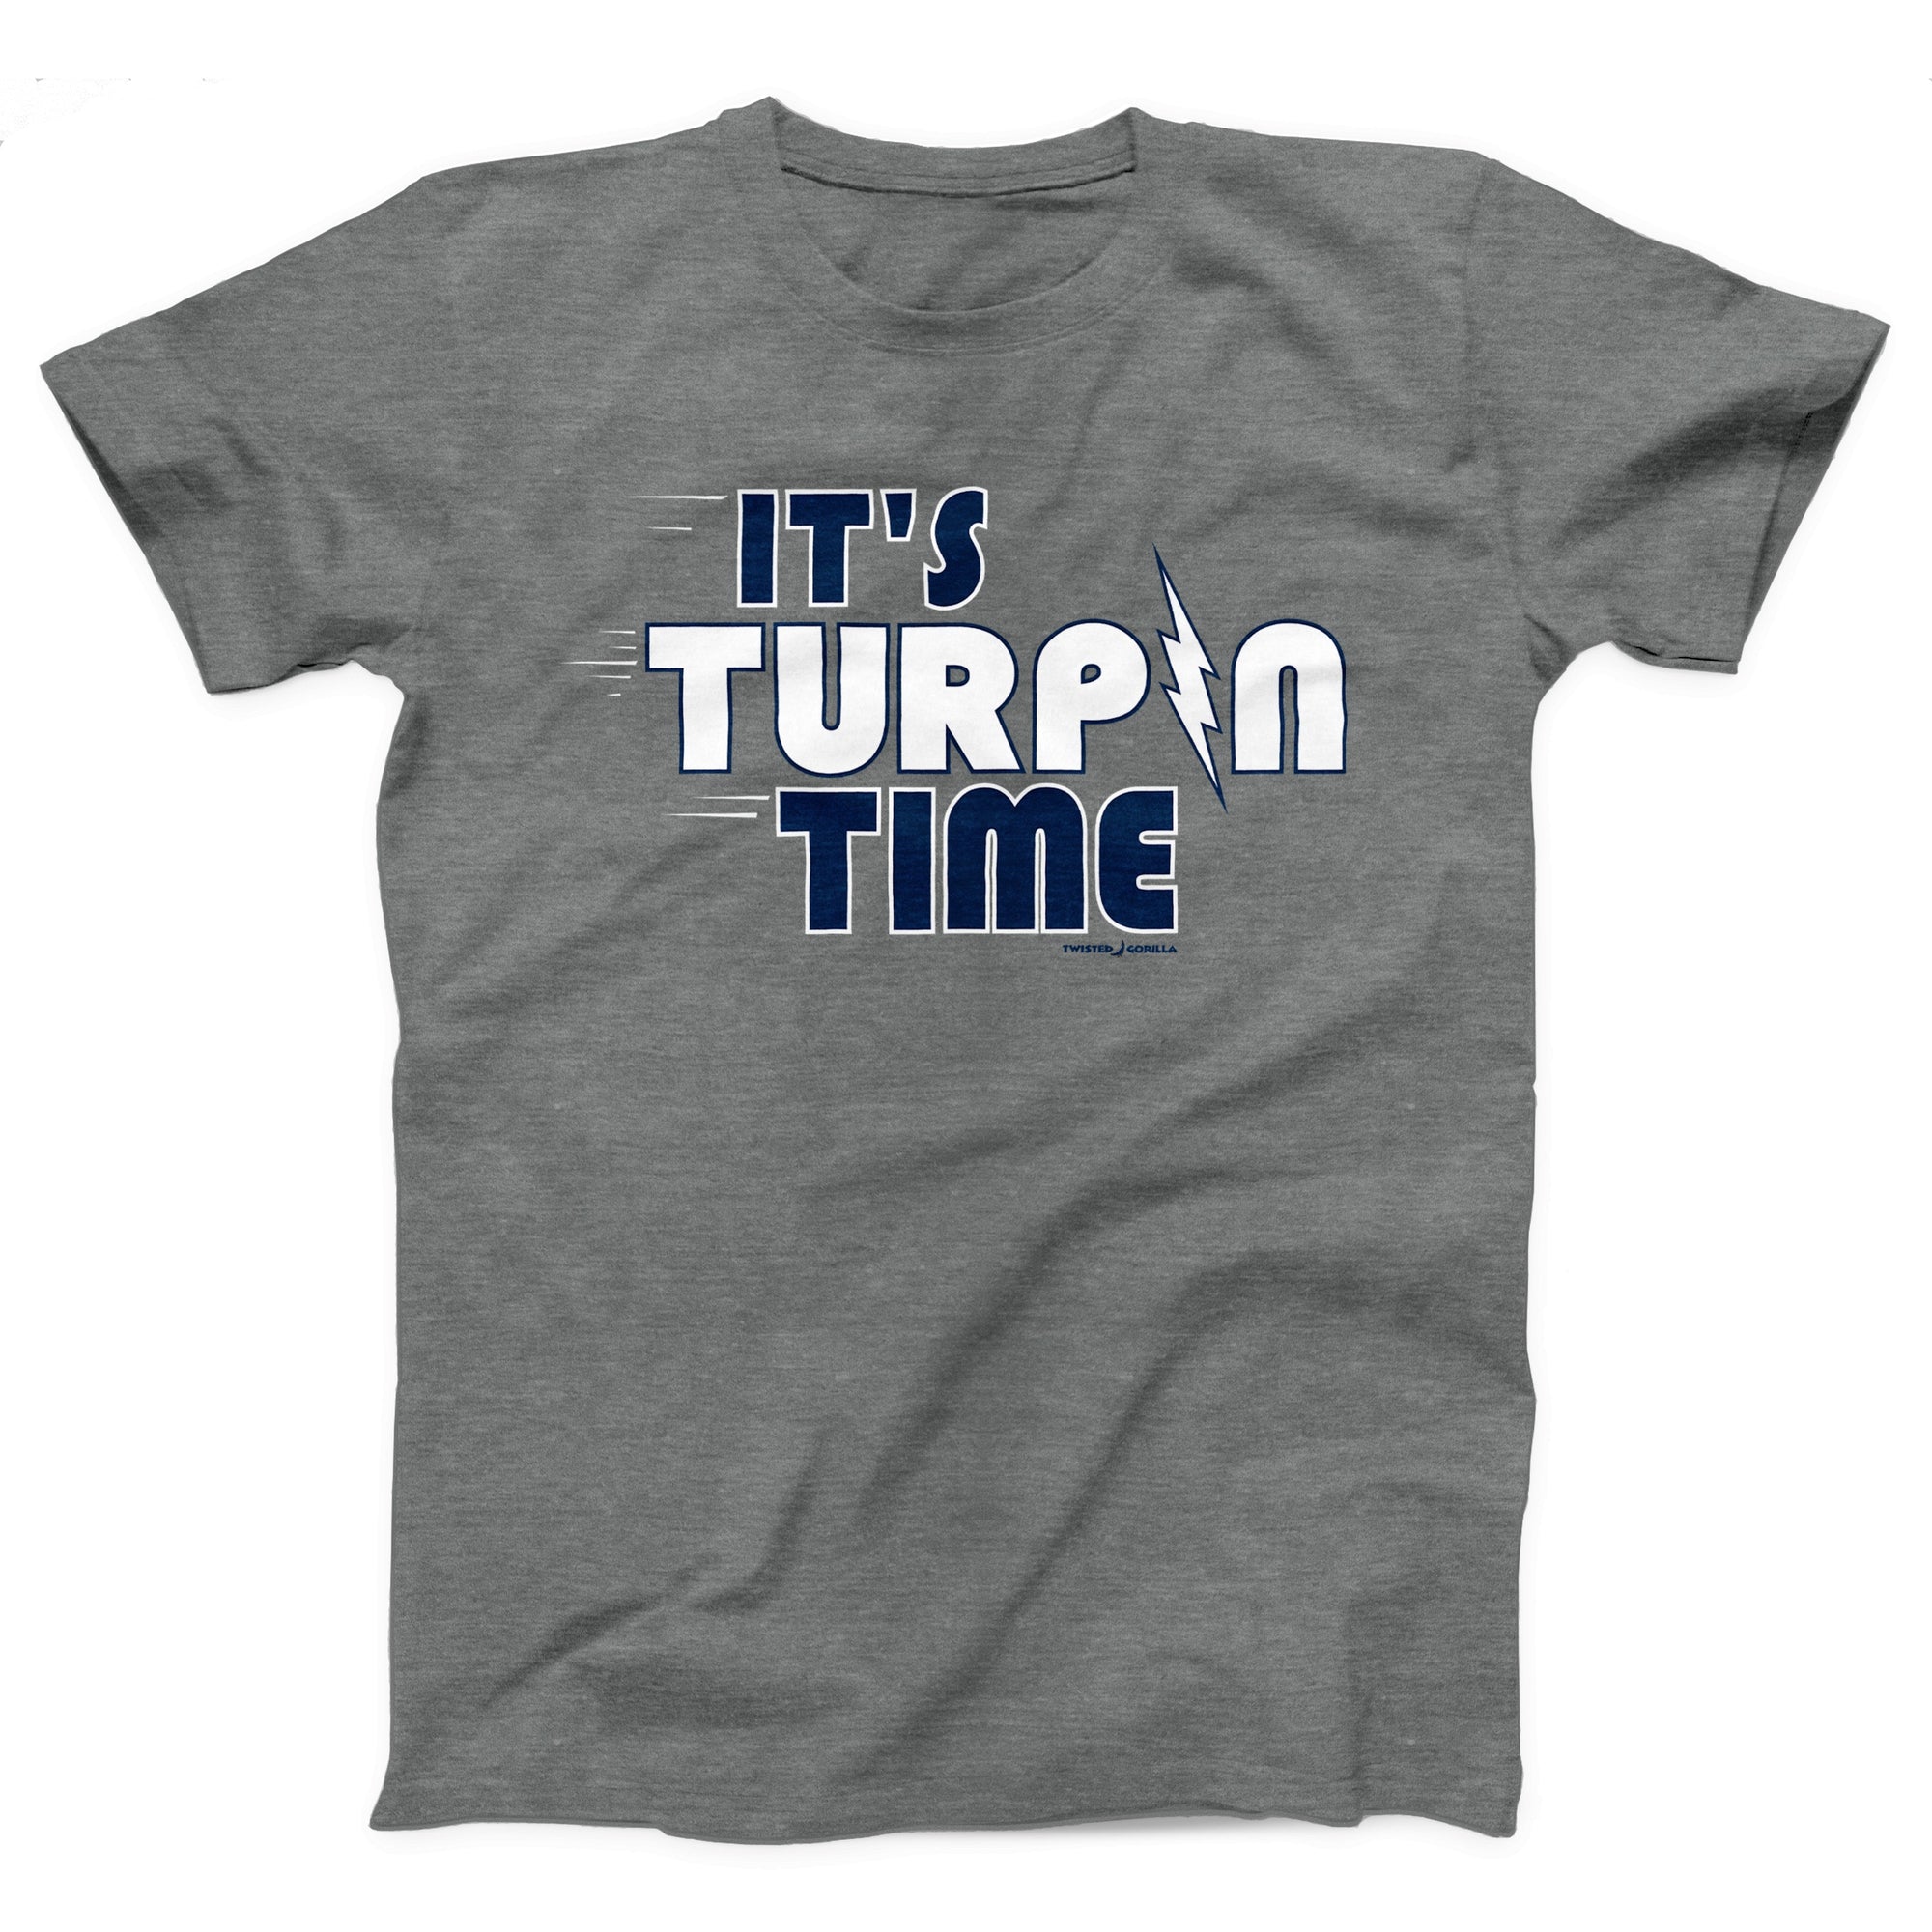 It's Turpin Time Adult Unisex T-Shirt - Twisted Gorilla